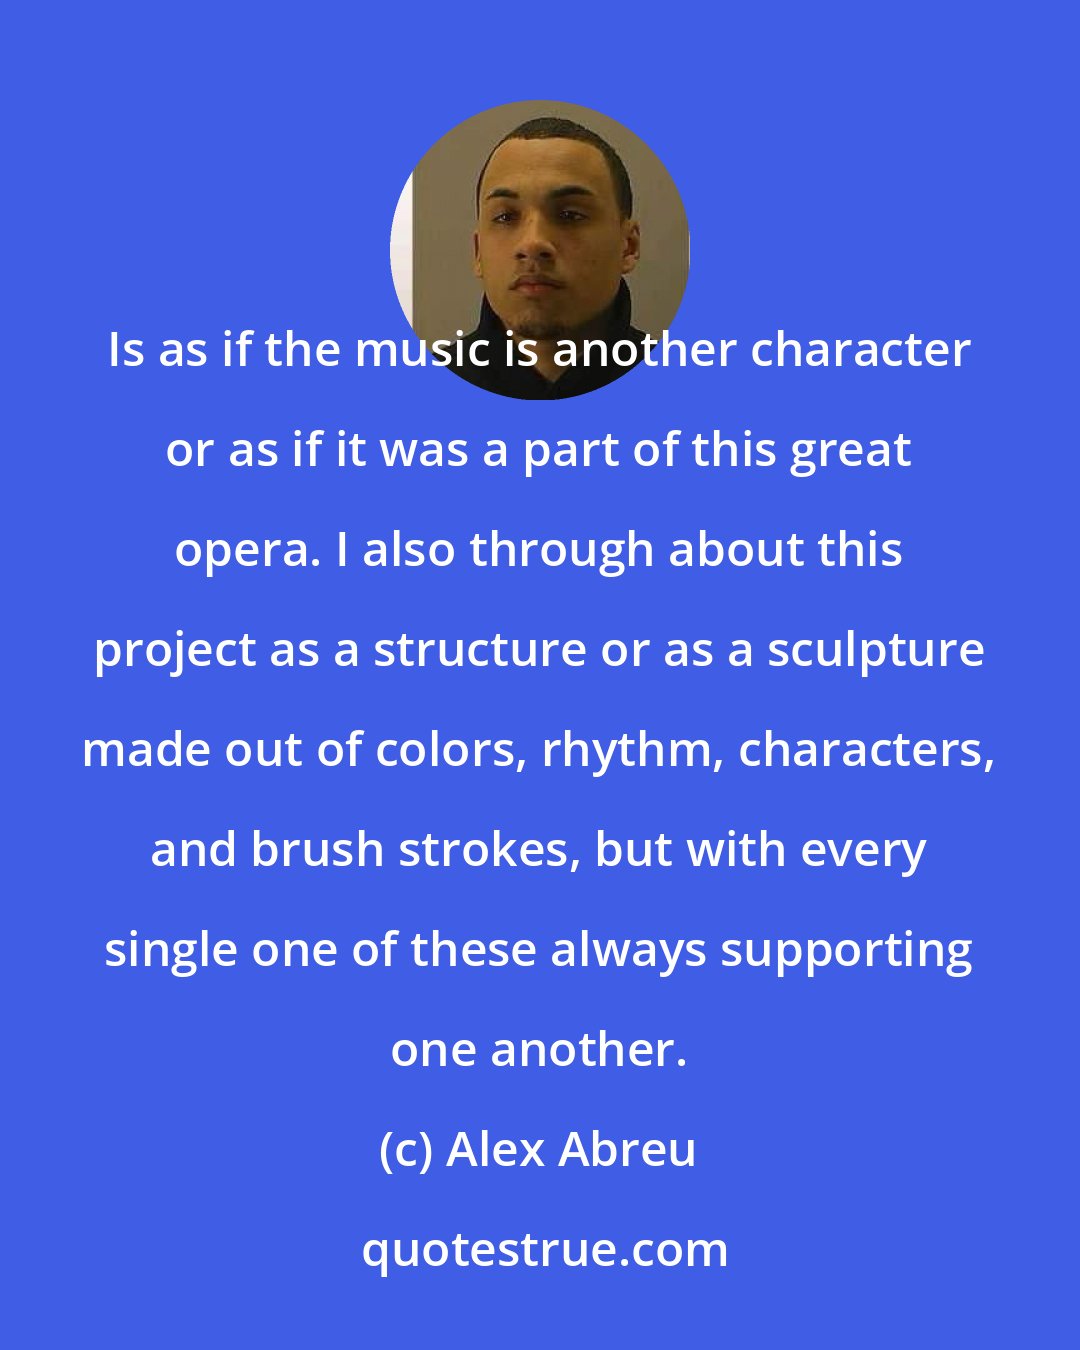 Alex Abreu: Is as if the music is another character or as if it was a part of this great opera. I also through about this project as a structure or as a sculpture made out of colors, rhythm, characters, and brush strokes, but with every single one of these always supporting one another.